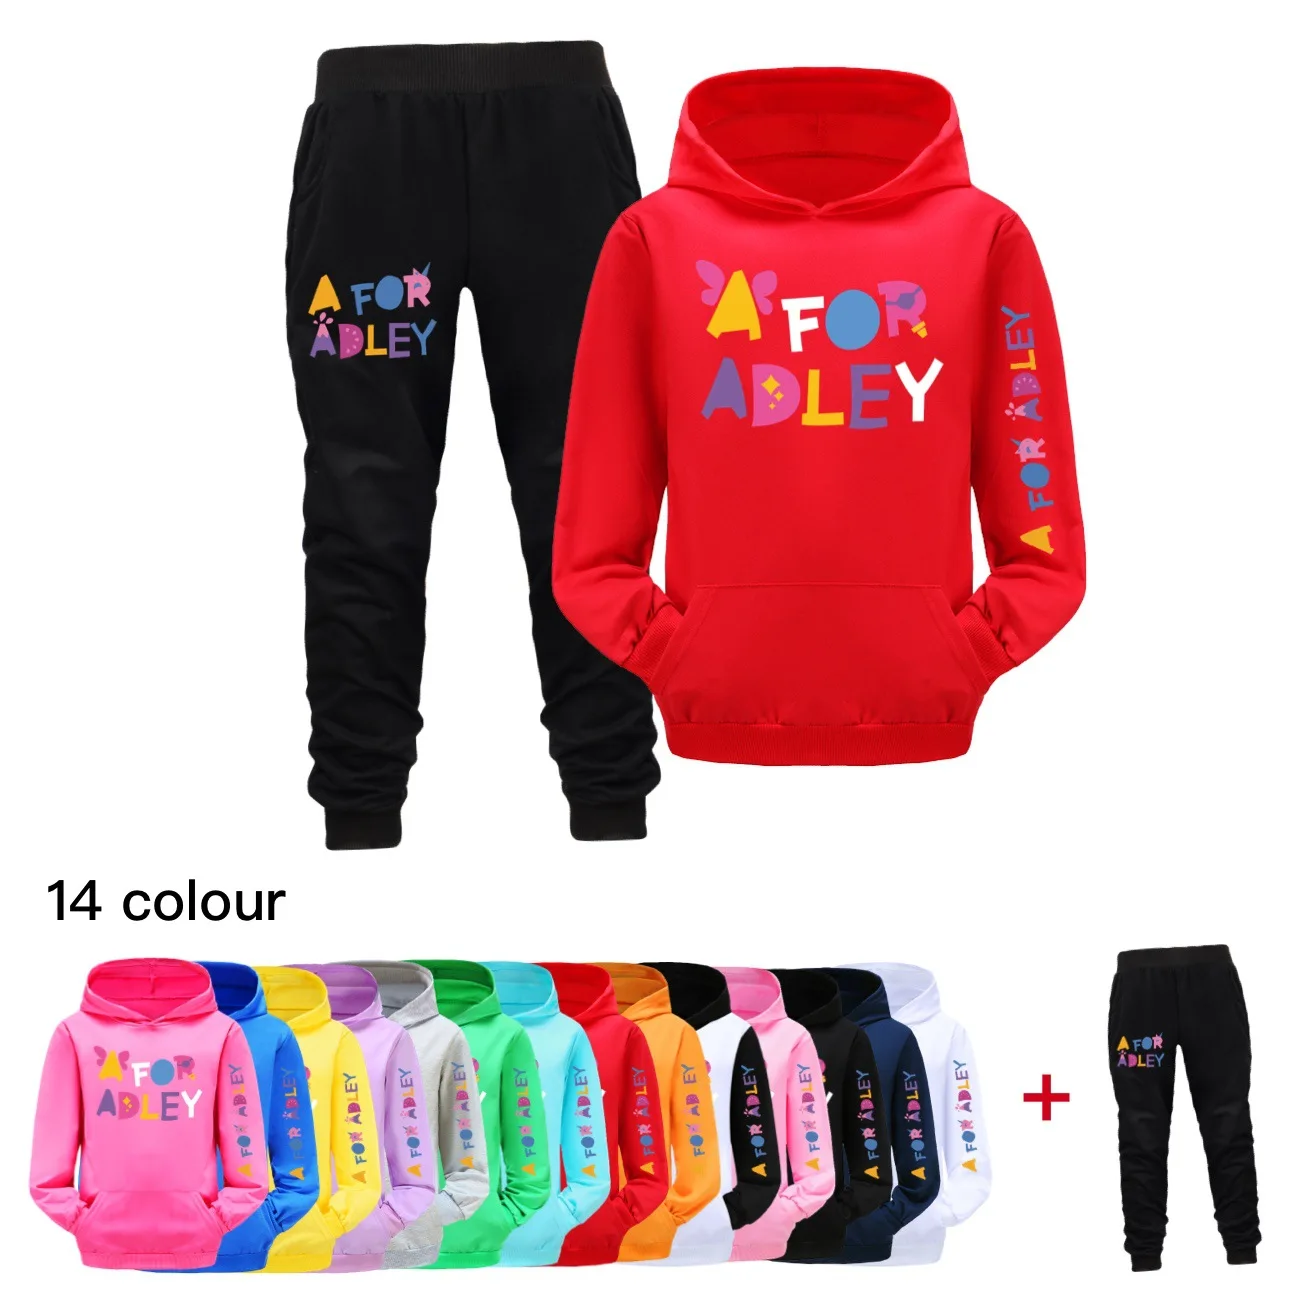 

A for Adley Cosplay Costume Baby Girls Hooded Sweatshirts Jogging Pants 2pcs Suits Teenager Boys Cartoon Clothes Children's Sets